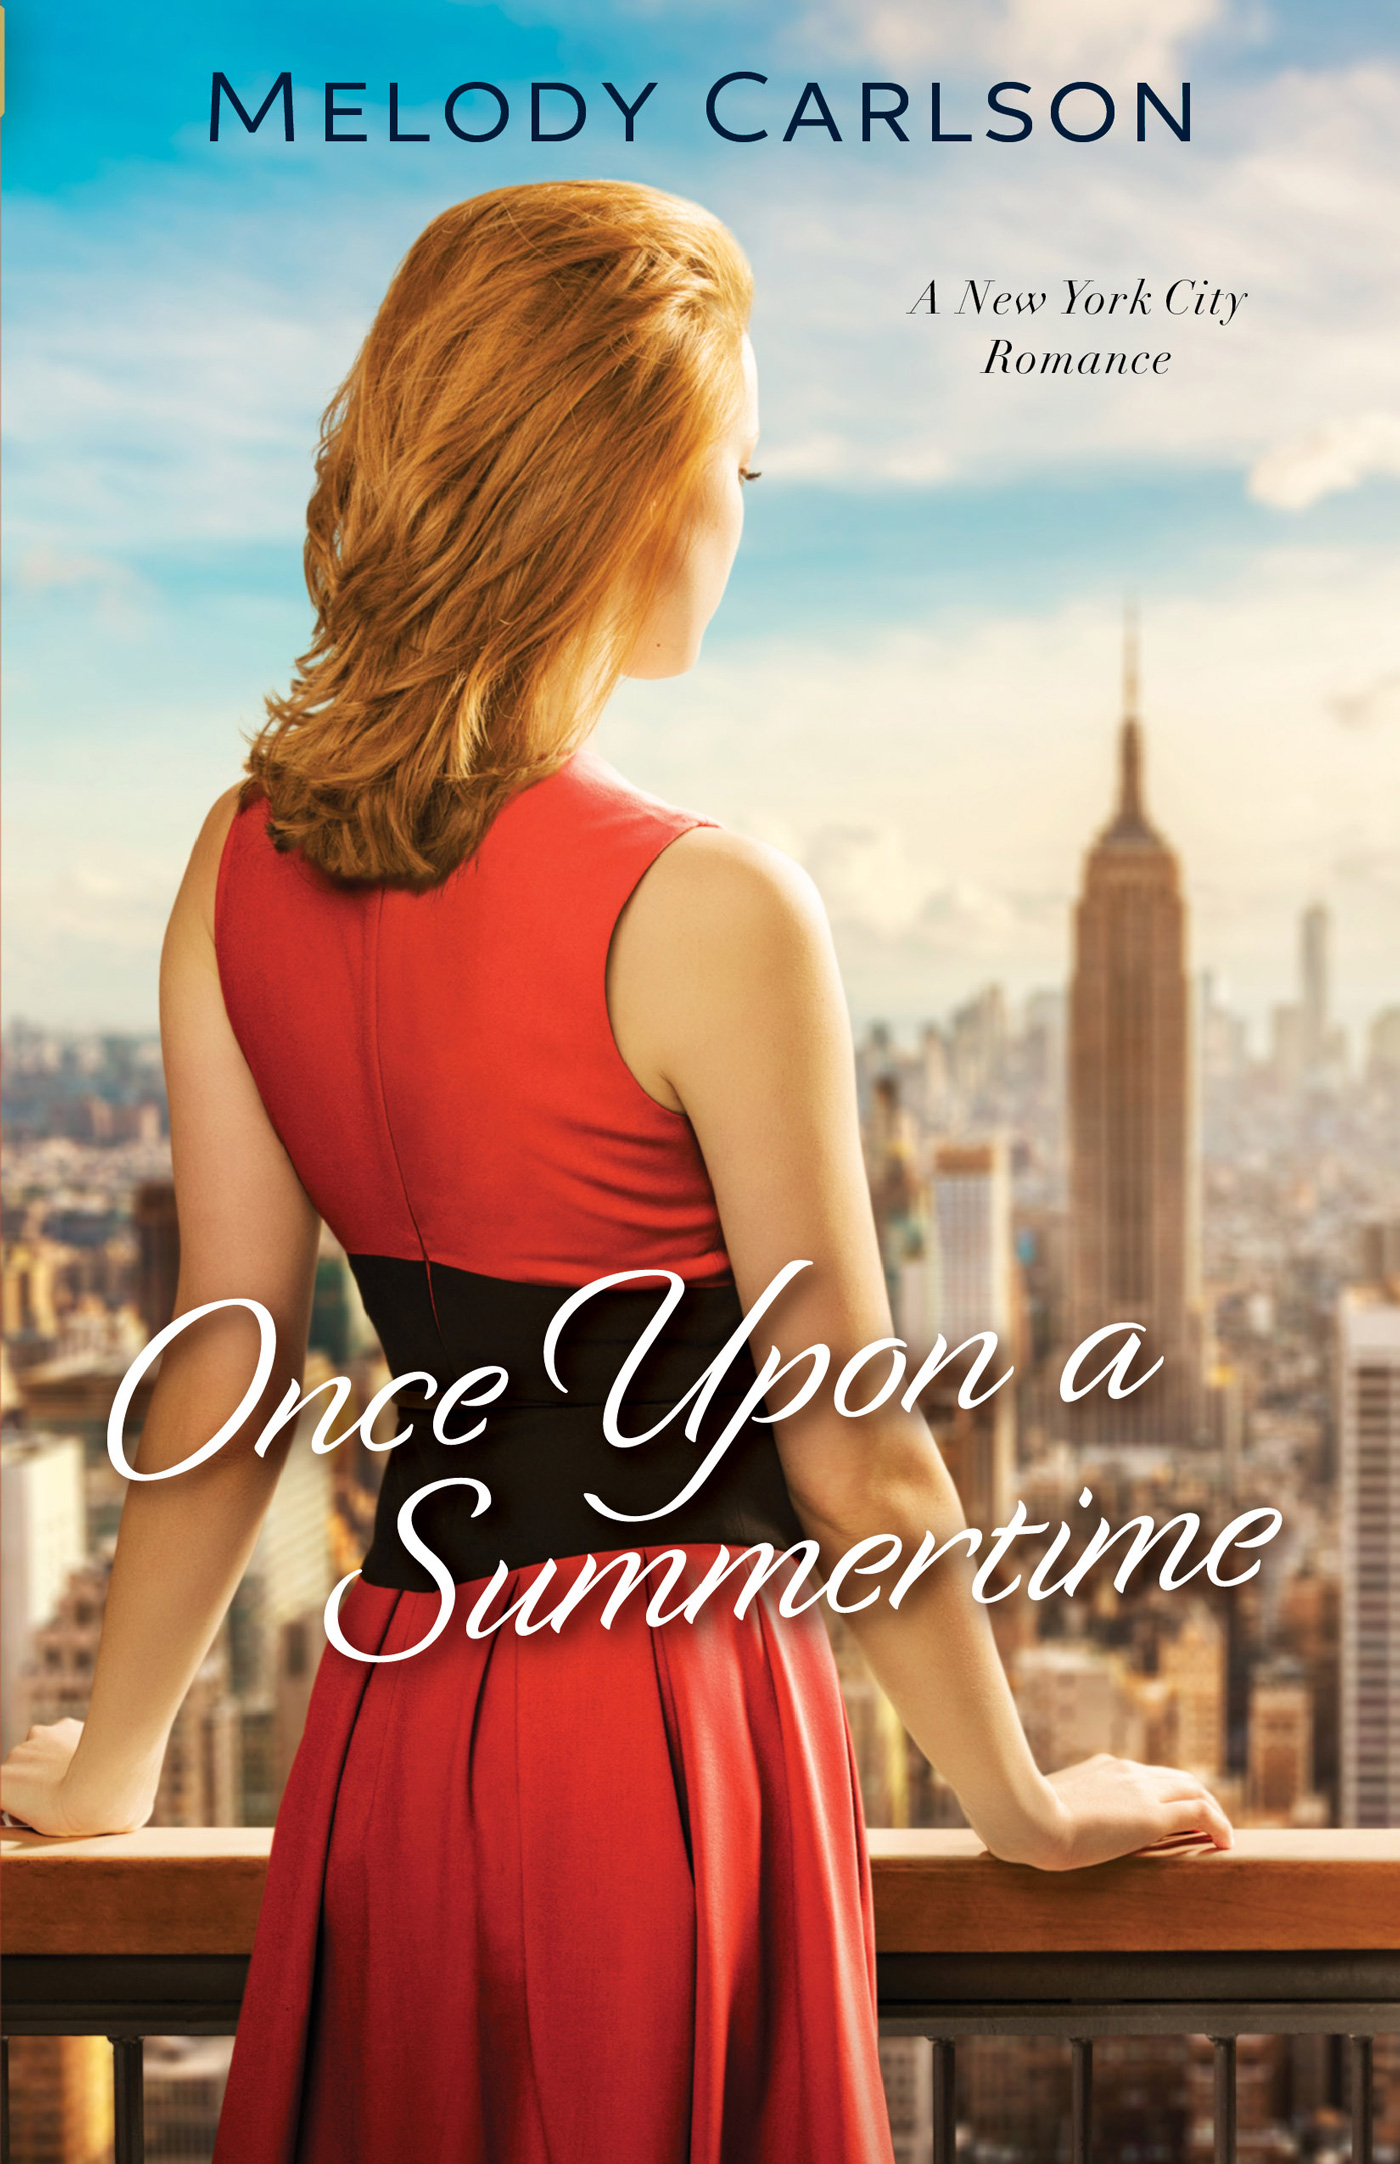 Once Upon a Summertime (2015) by Melody Carlson